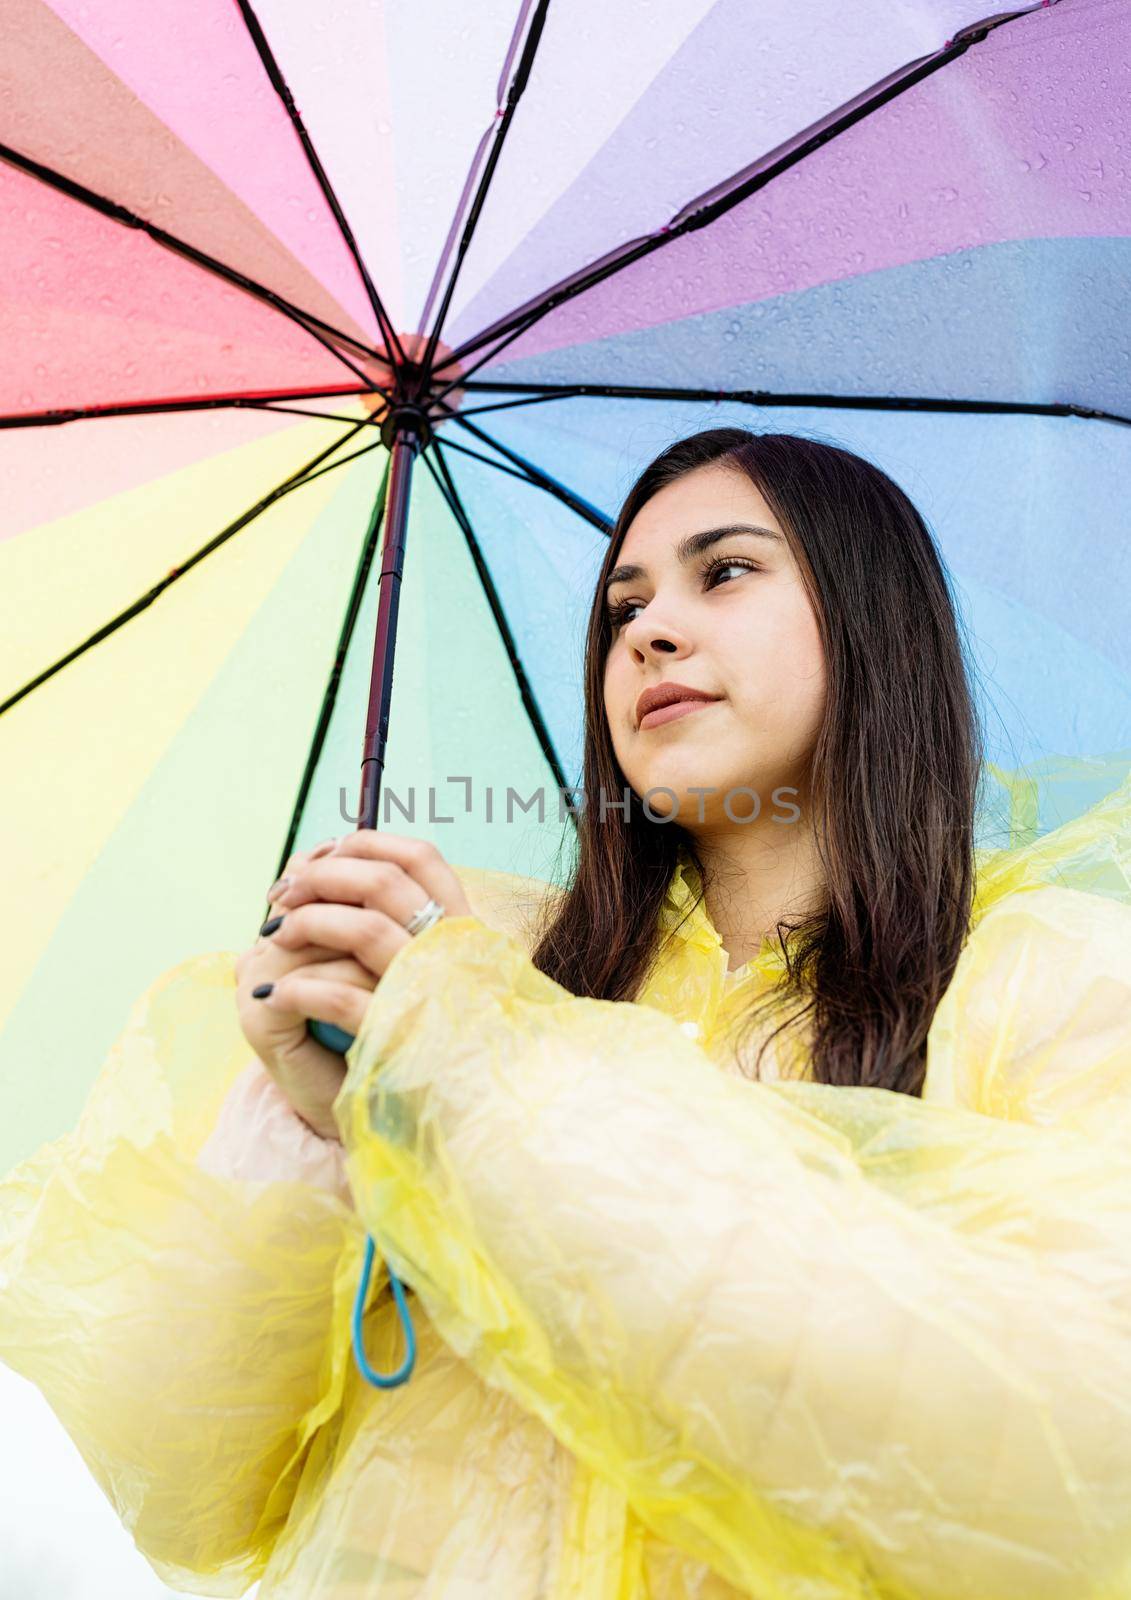 Beautiful brunette woman holding colorful umbrella out in the rain by Desperada